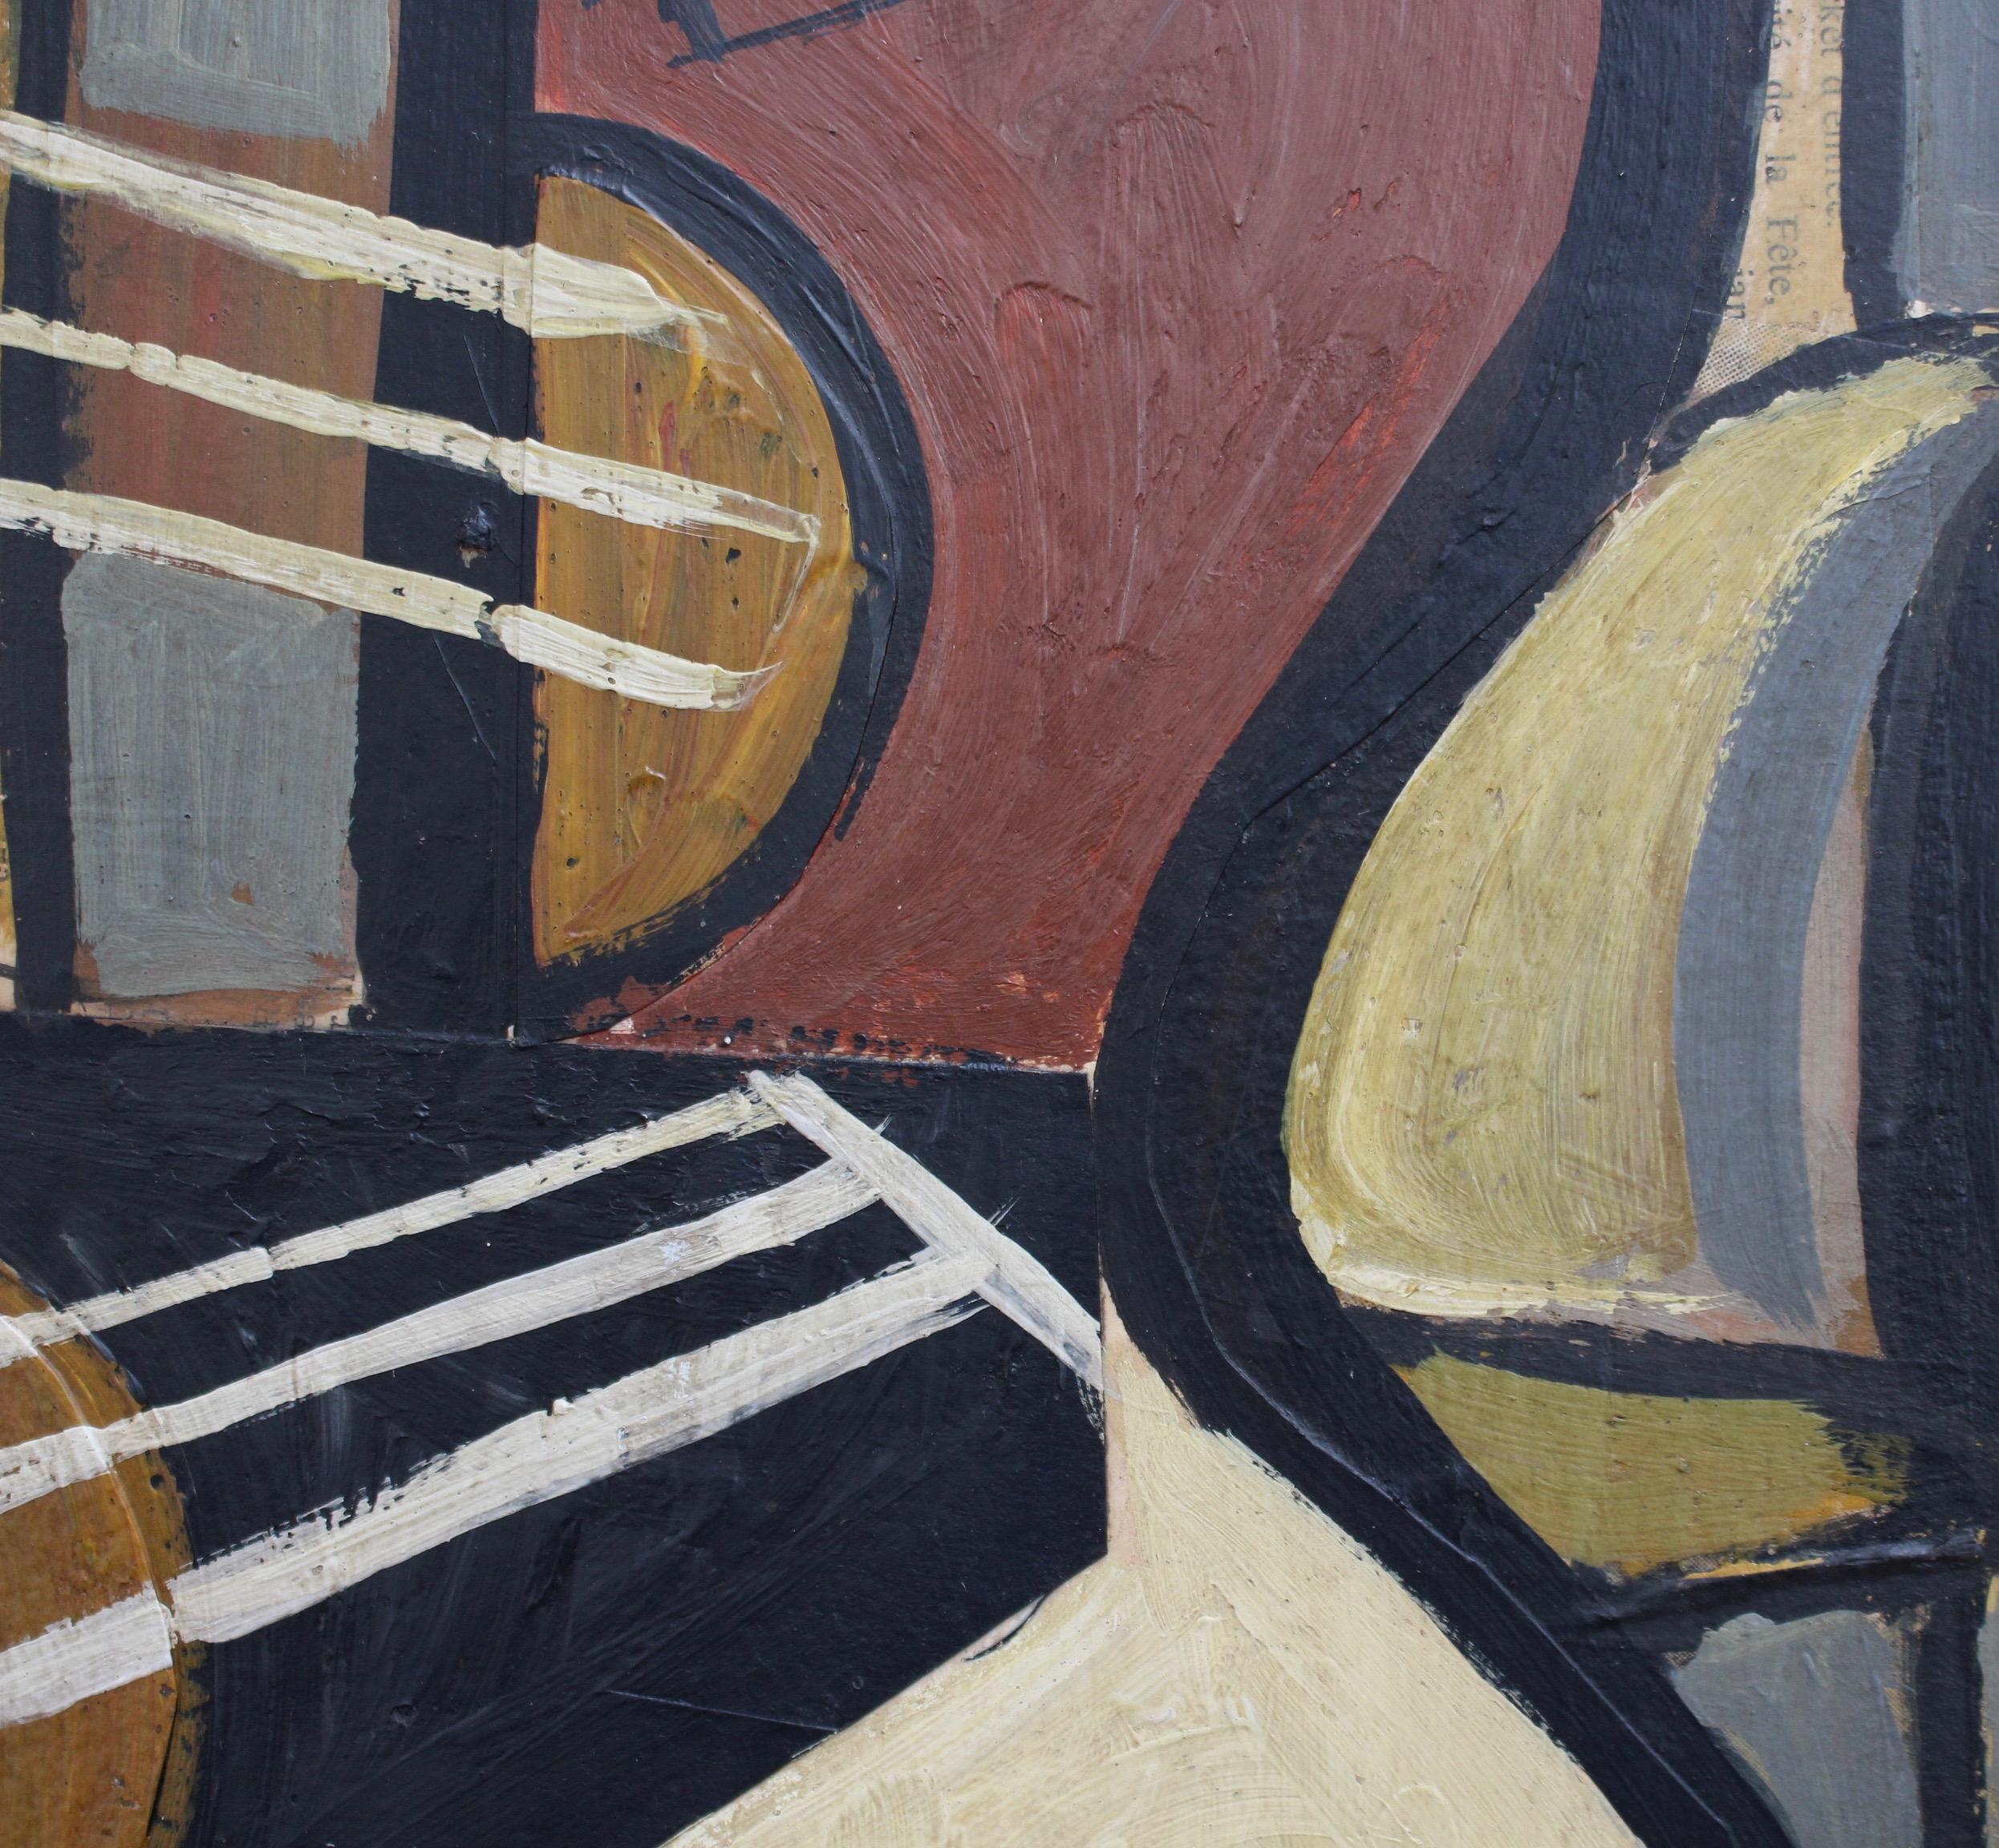 'Still Life with Guitar', oil on board, by Lacoste (circa 1950s - 1970s). Geometric shapes and lines delineate a classical guitar in vibrant colours in this post-war artwork. Inspiration surely came from Georges Braque's early work. Braque and